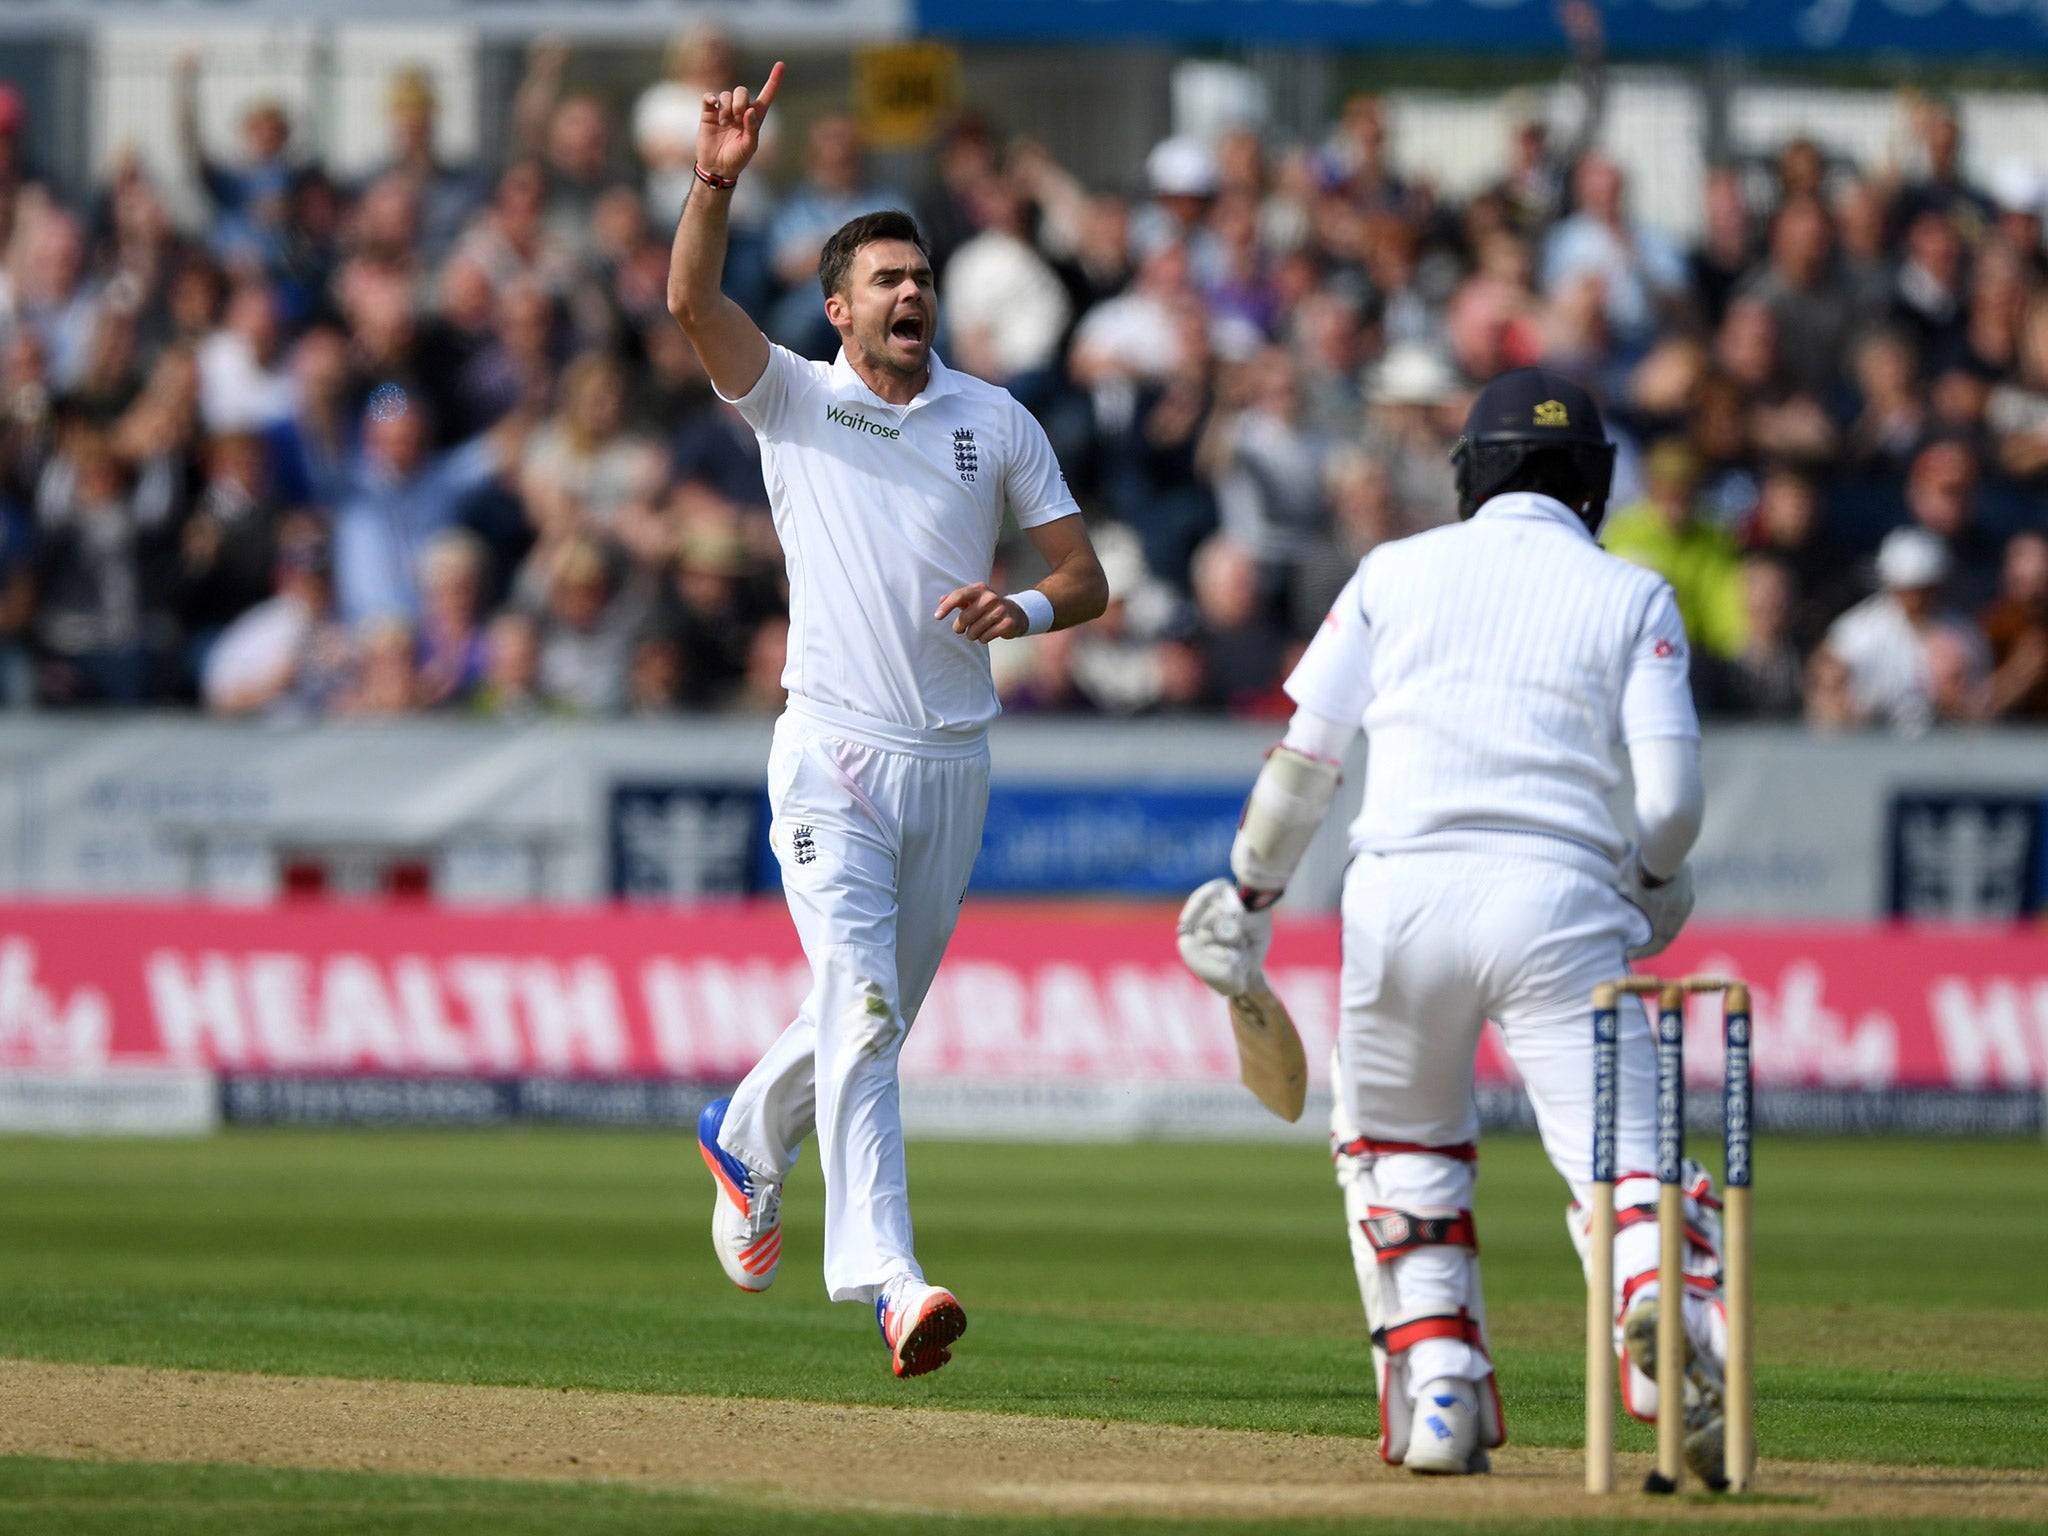 England bowler James Anderson celebrates taking a wicket in the second Test against Sri Lanka